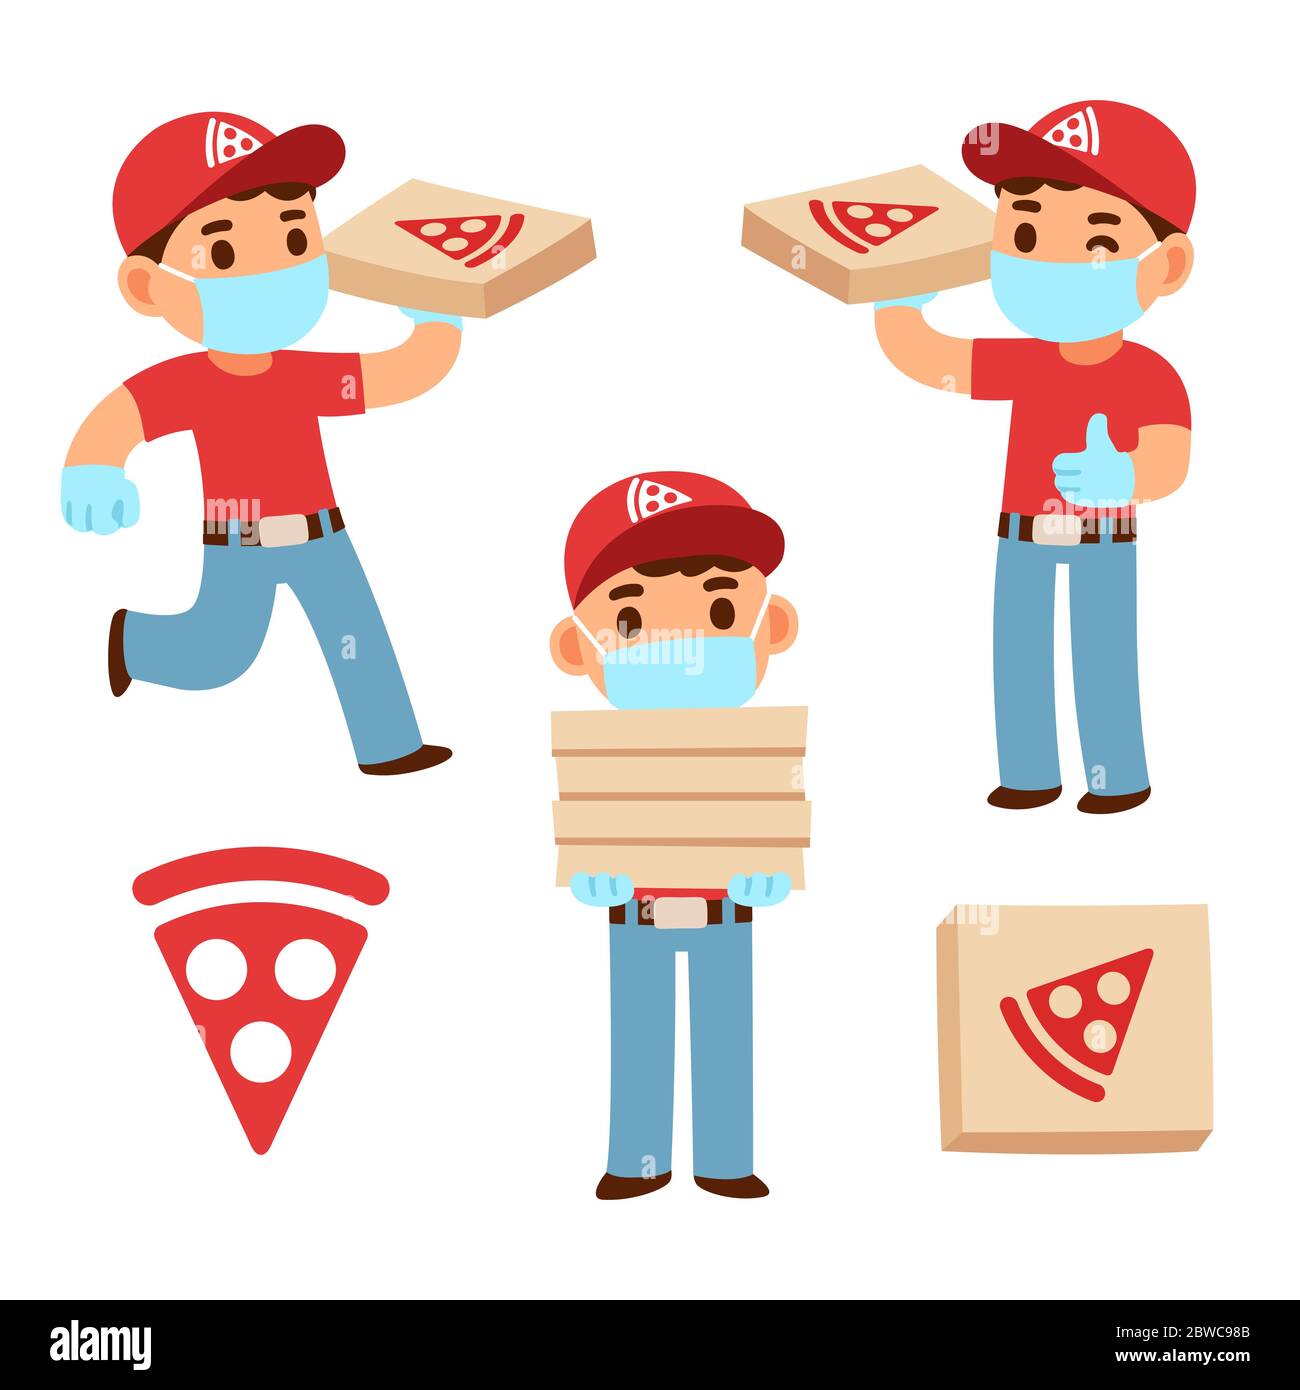 Cute cartoon pizza delivery boy in face mask and gloves. Pandemic lockdown and quarantine food delivering service. Vector illustration set. Stock Vector